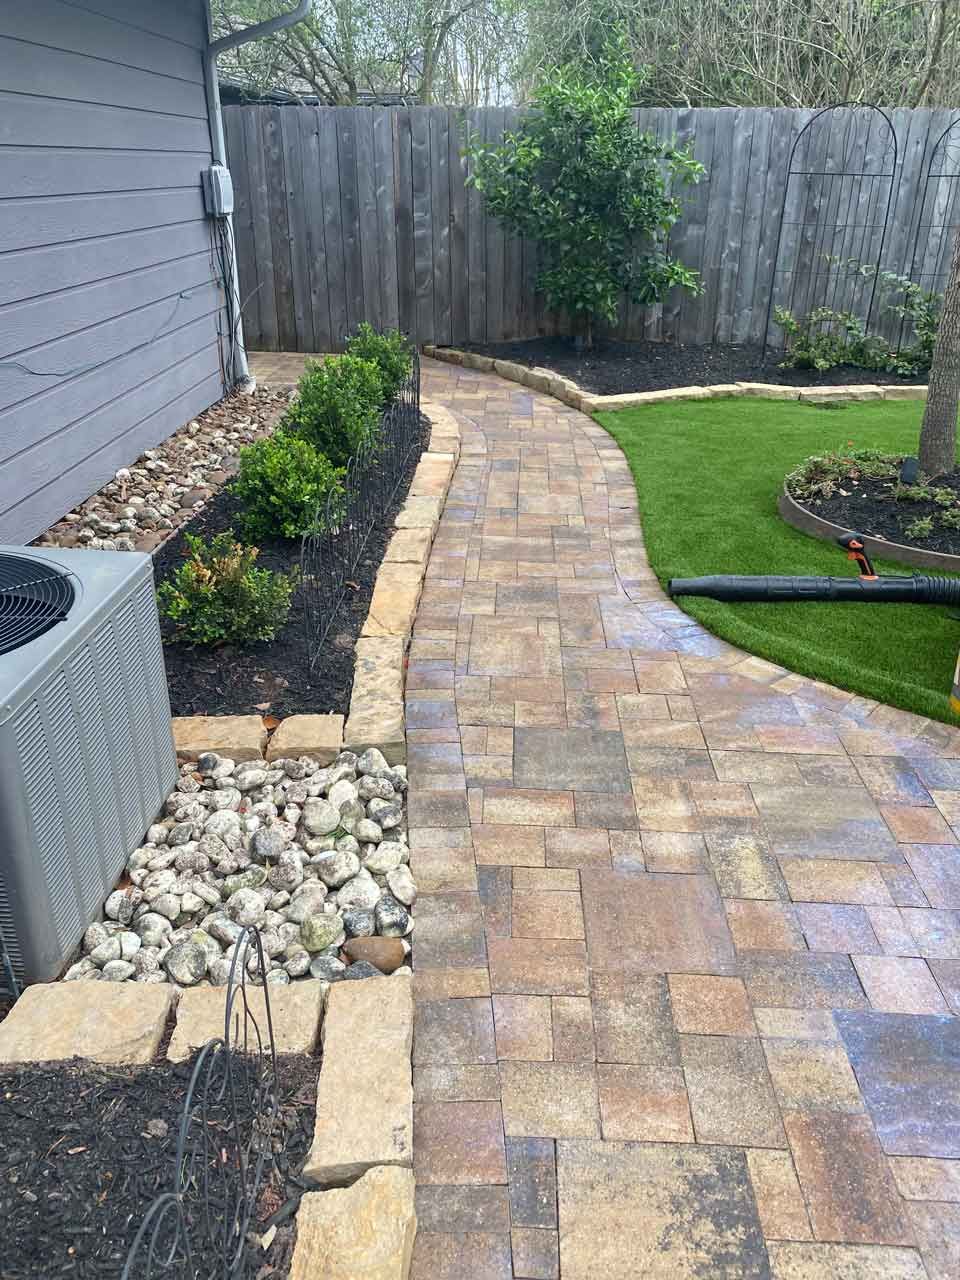 Stone bricks walking path in the backyard with landscaping